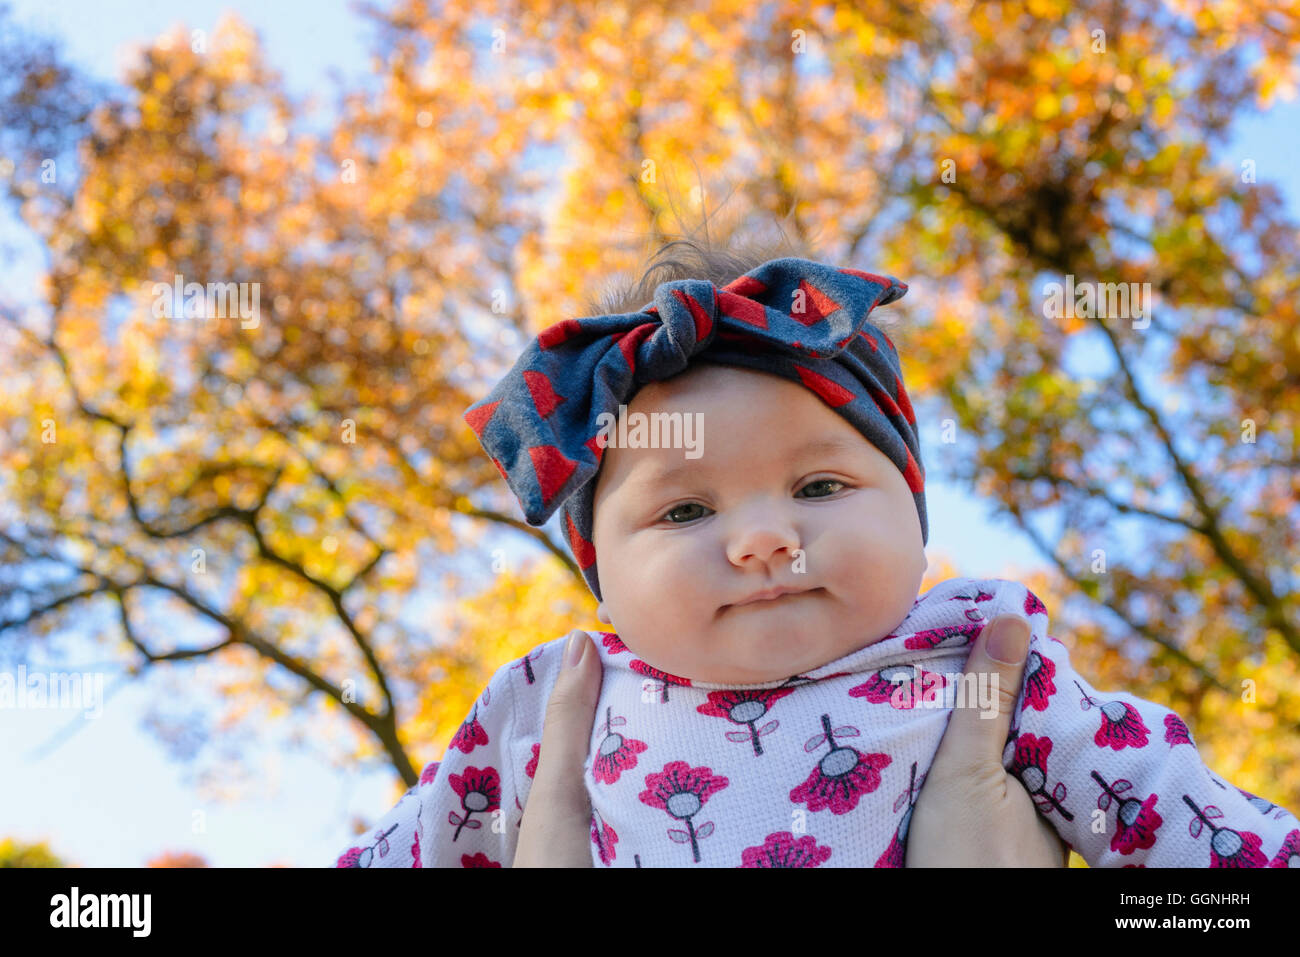 Woman holding baby girl against autumn tree Stock Photo